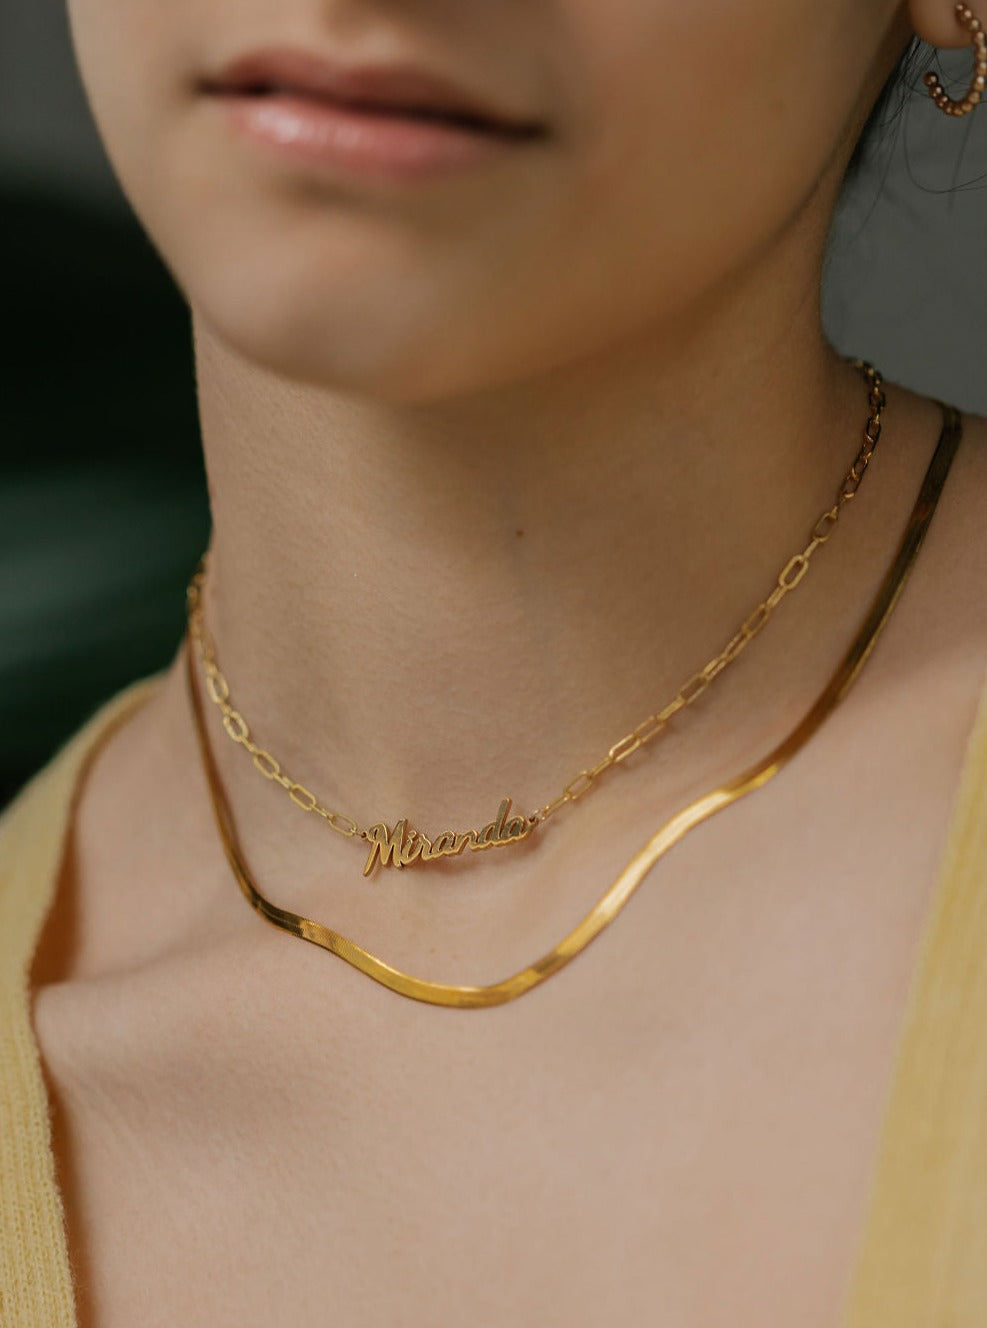 a woman is wearing bold name necklace with link chains